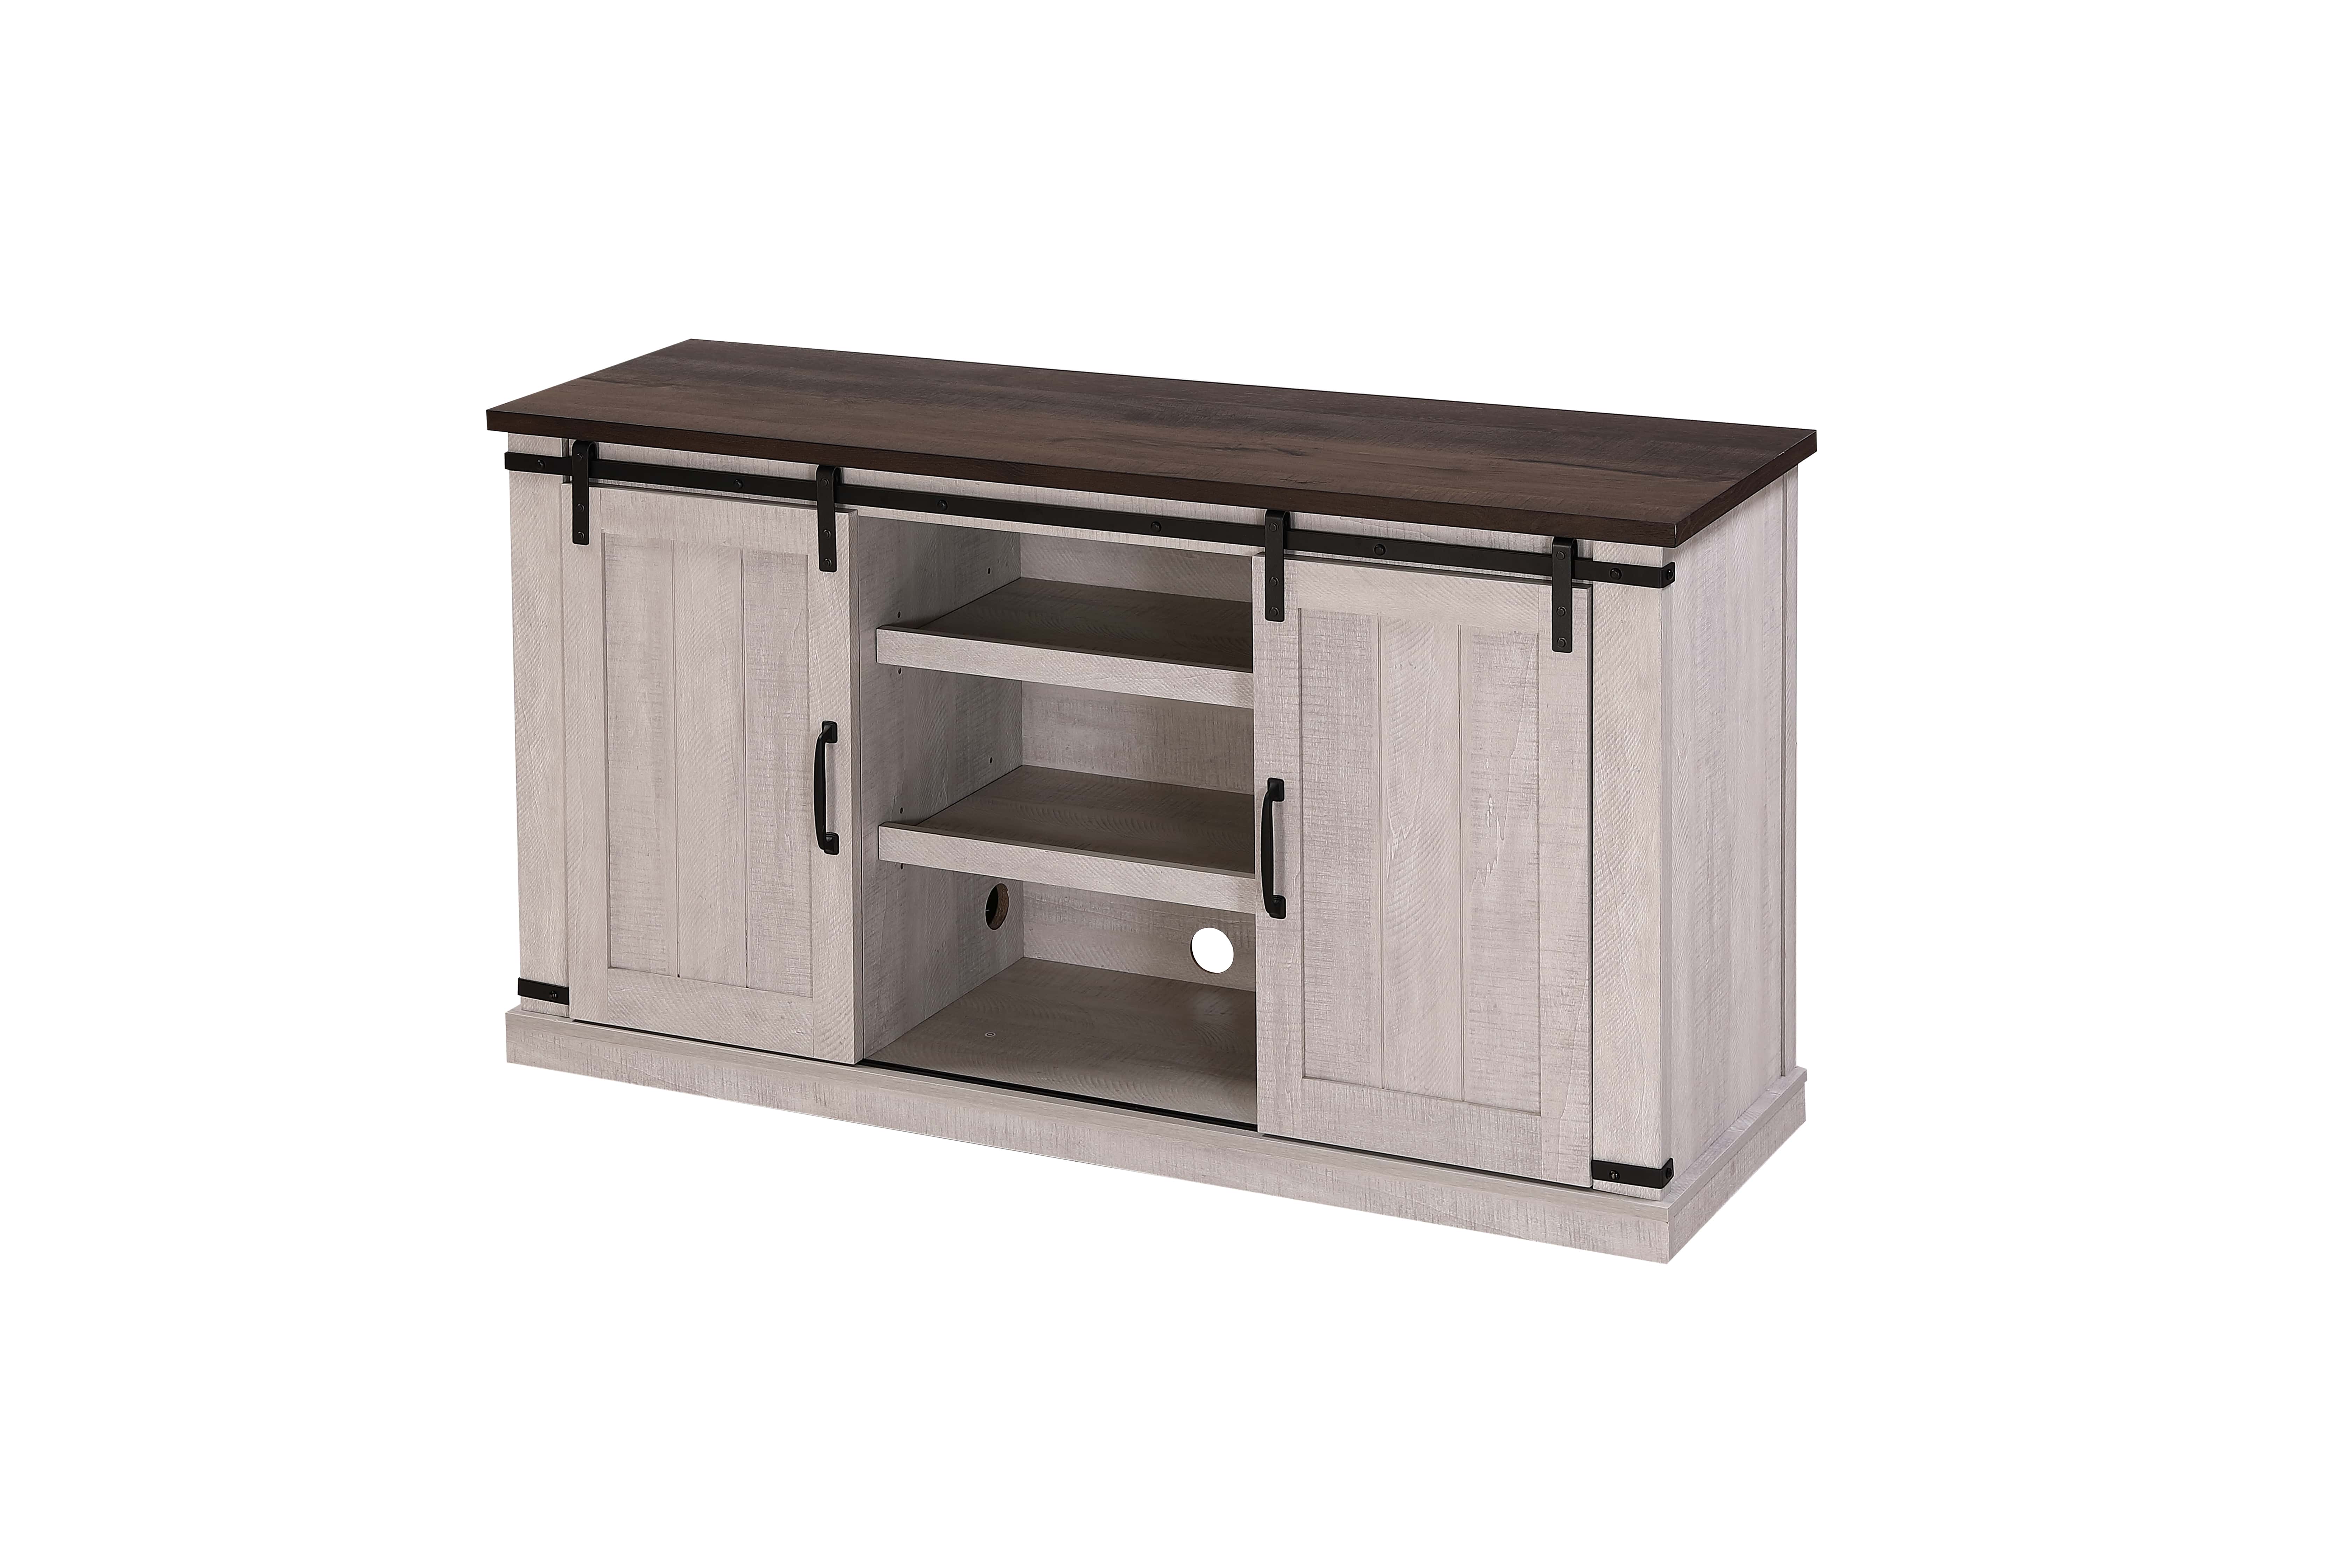 Richseat Barn Door TV Stand, Fits Most 60'' Flat Panel TVs, White Oak Finish - image 5 of 13